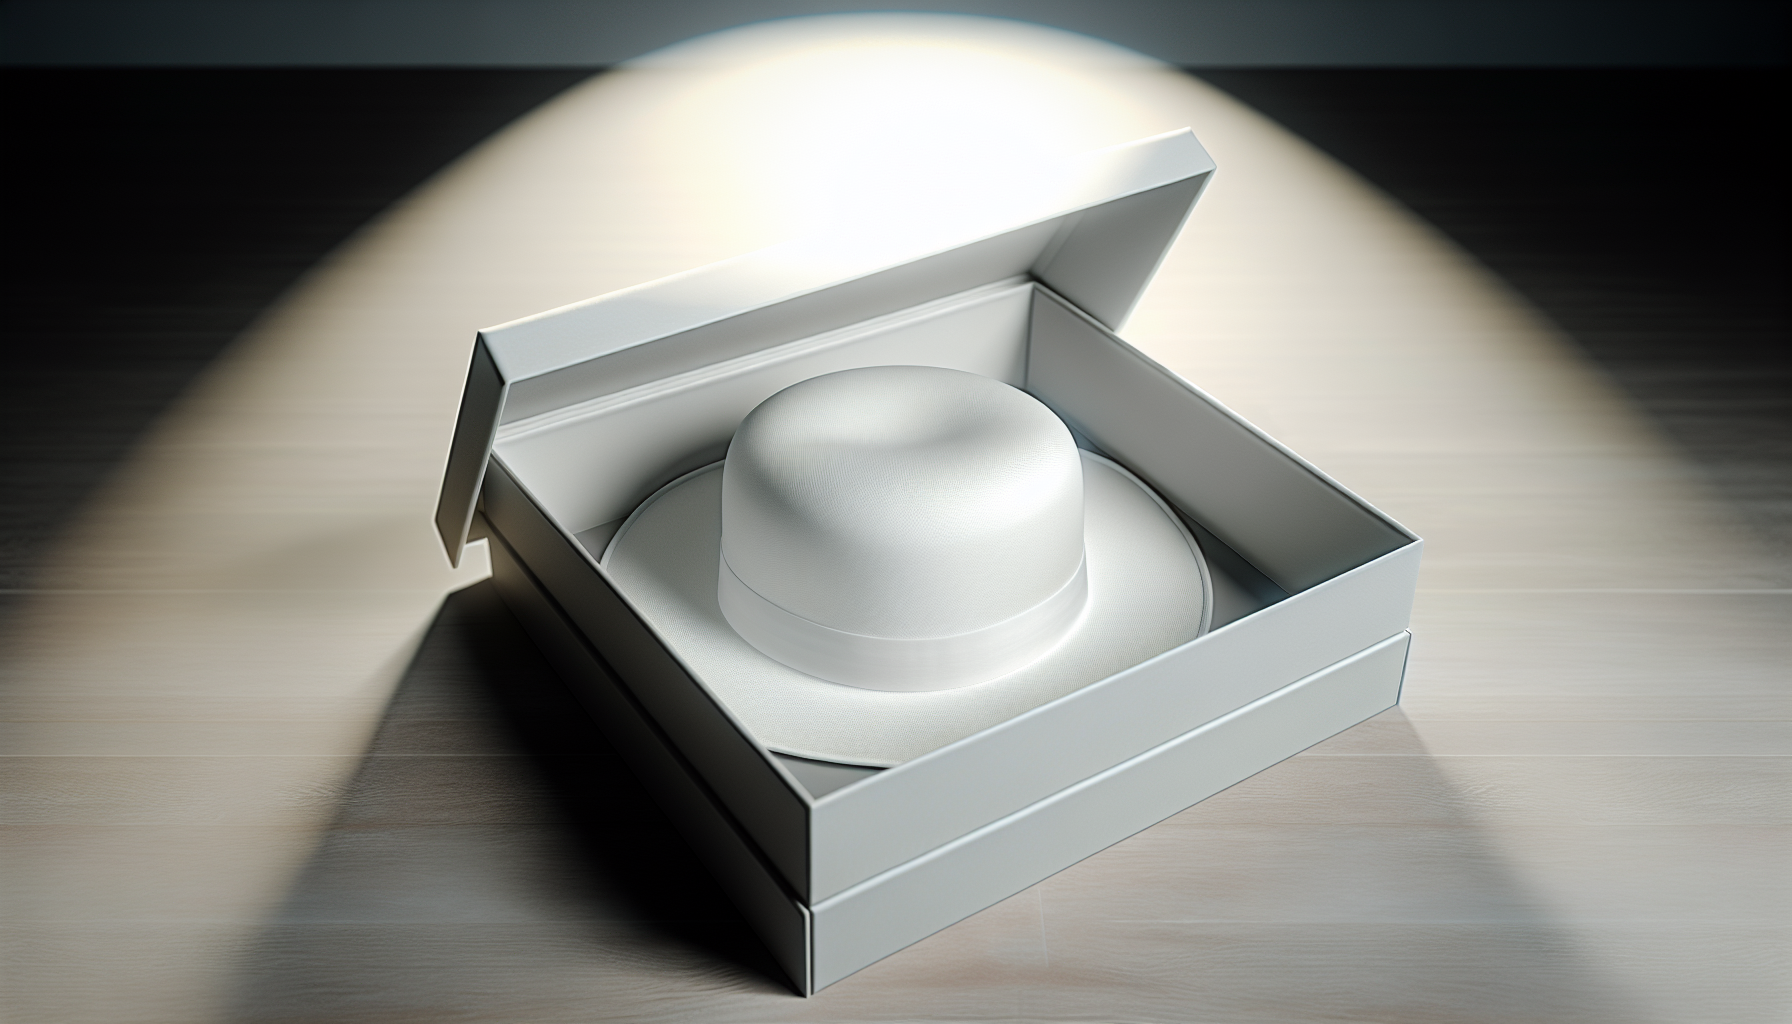 A white hat stored in a hat box